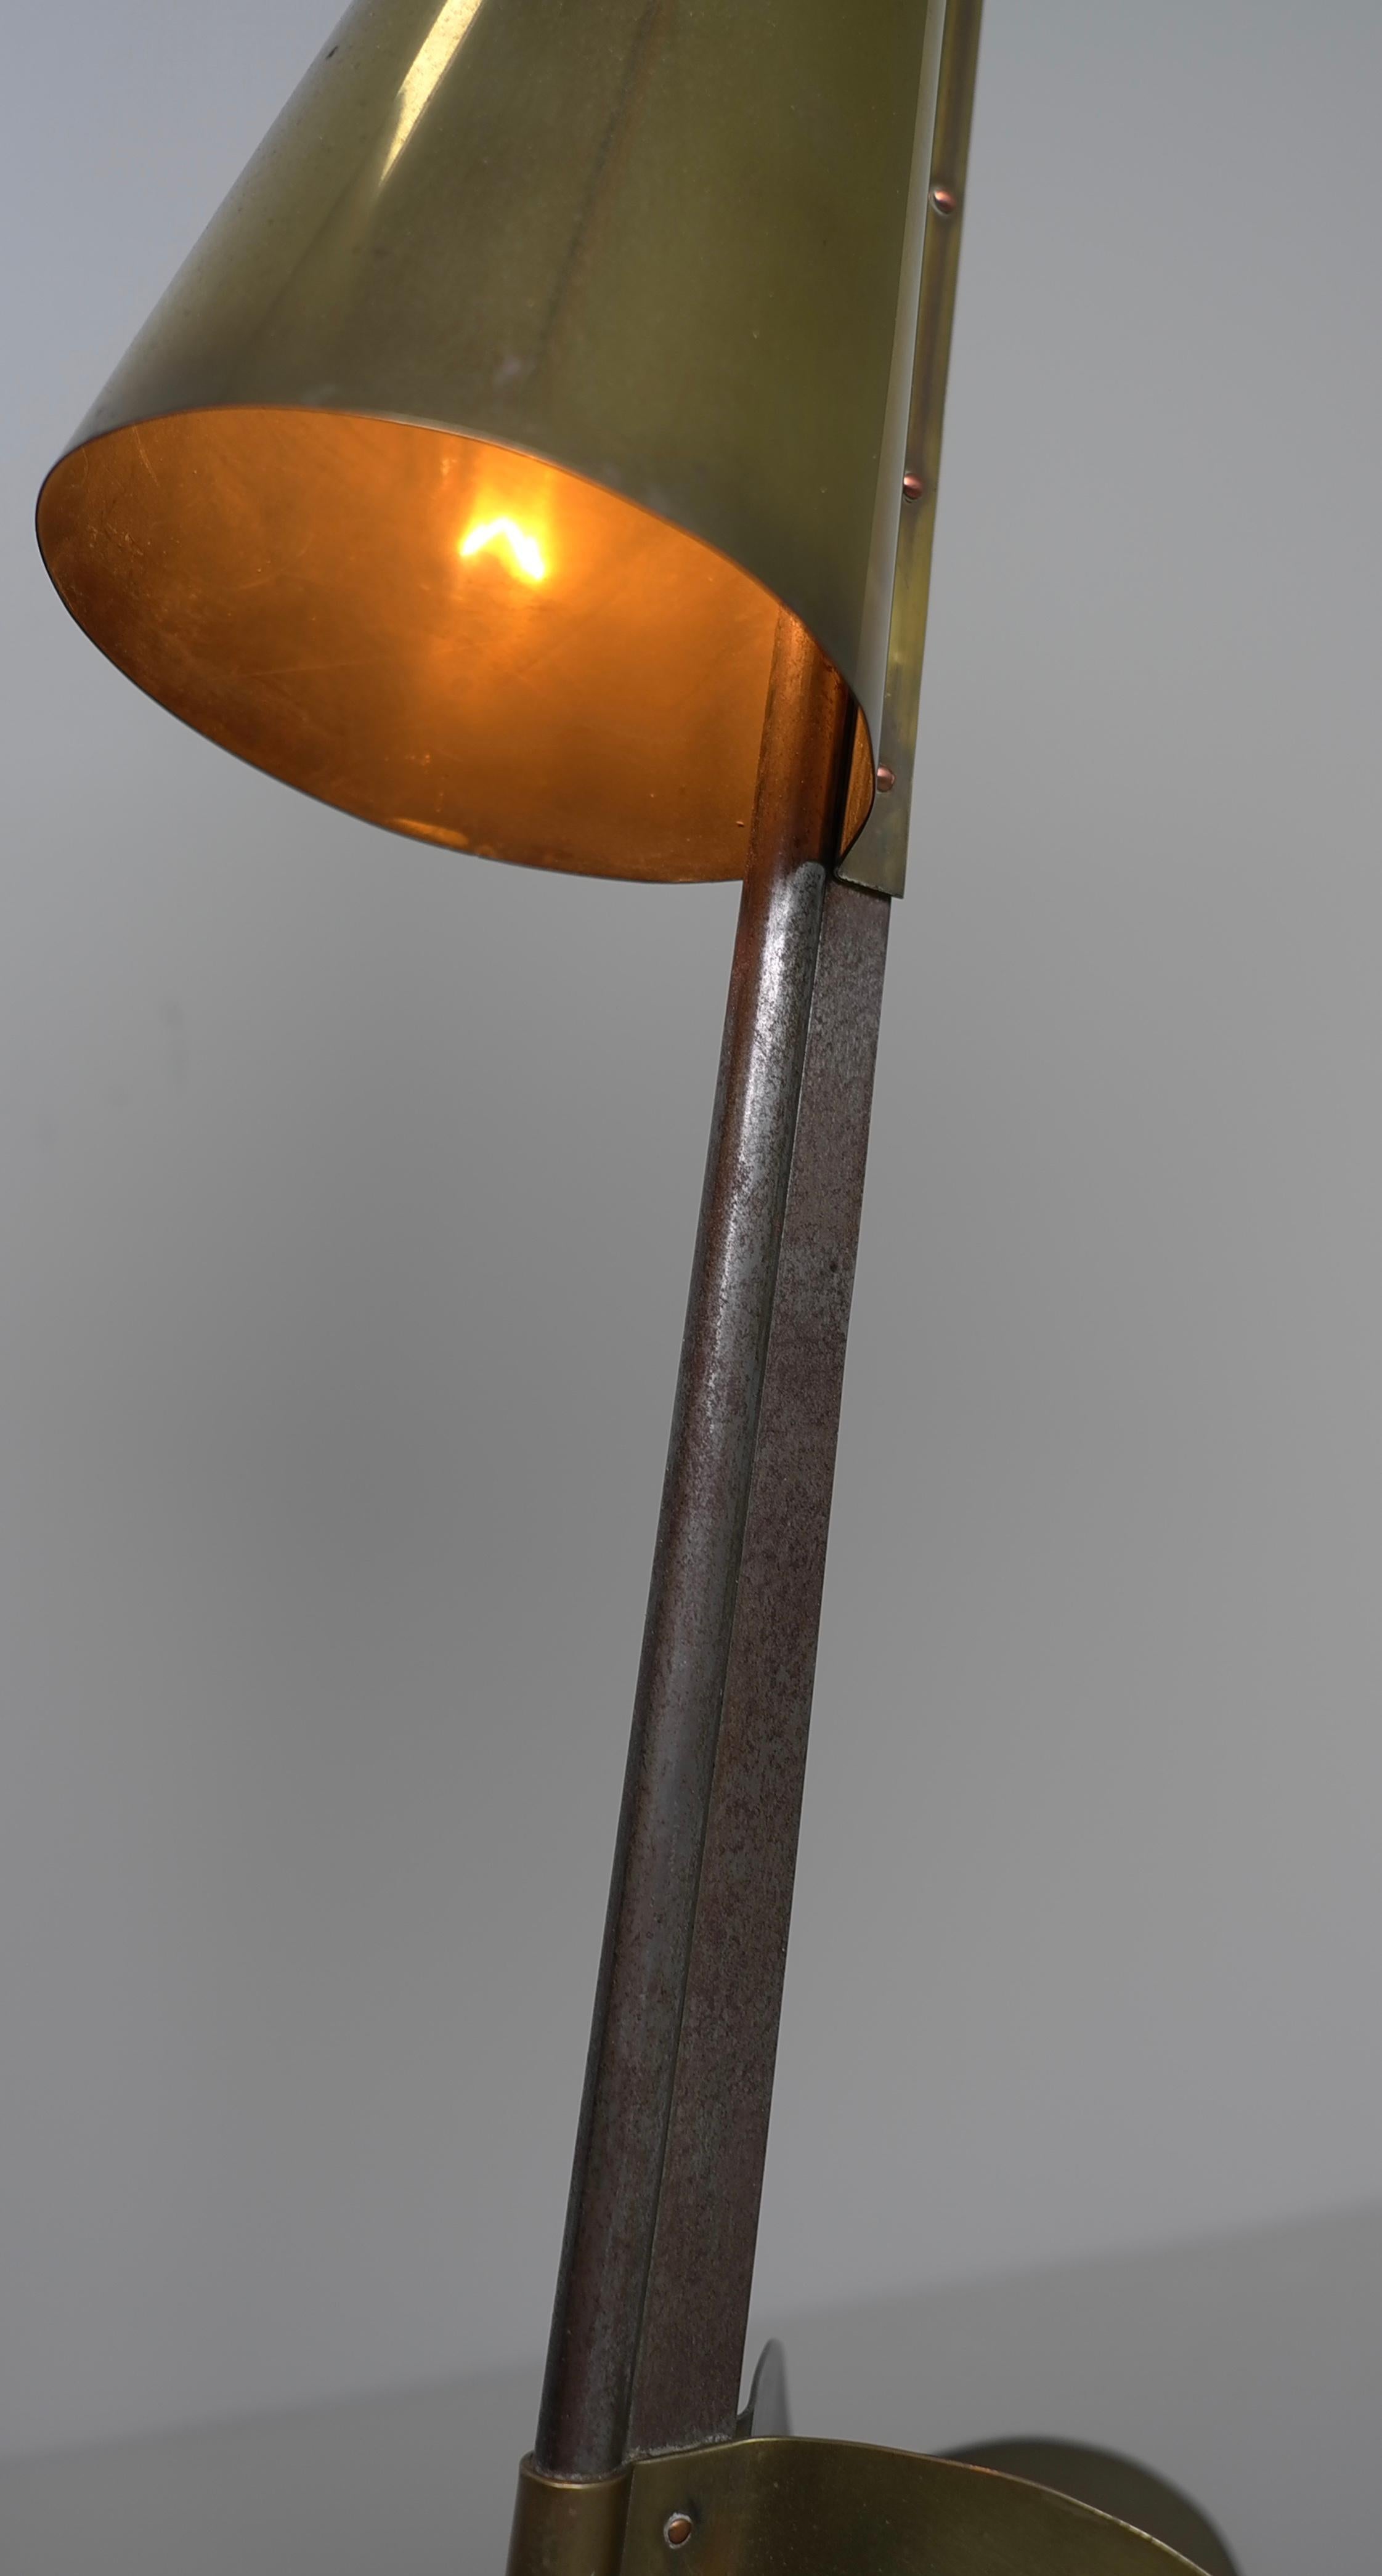 Architect Table Lamp, Sculptural shaped Copper and Steel, 1930's For Sale 1